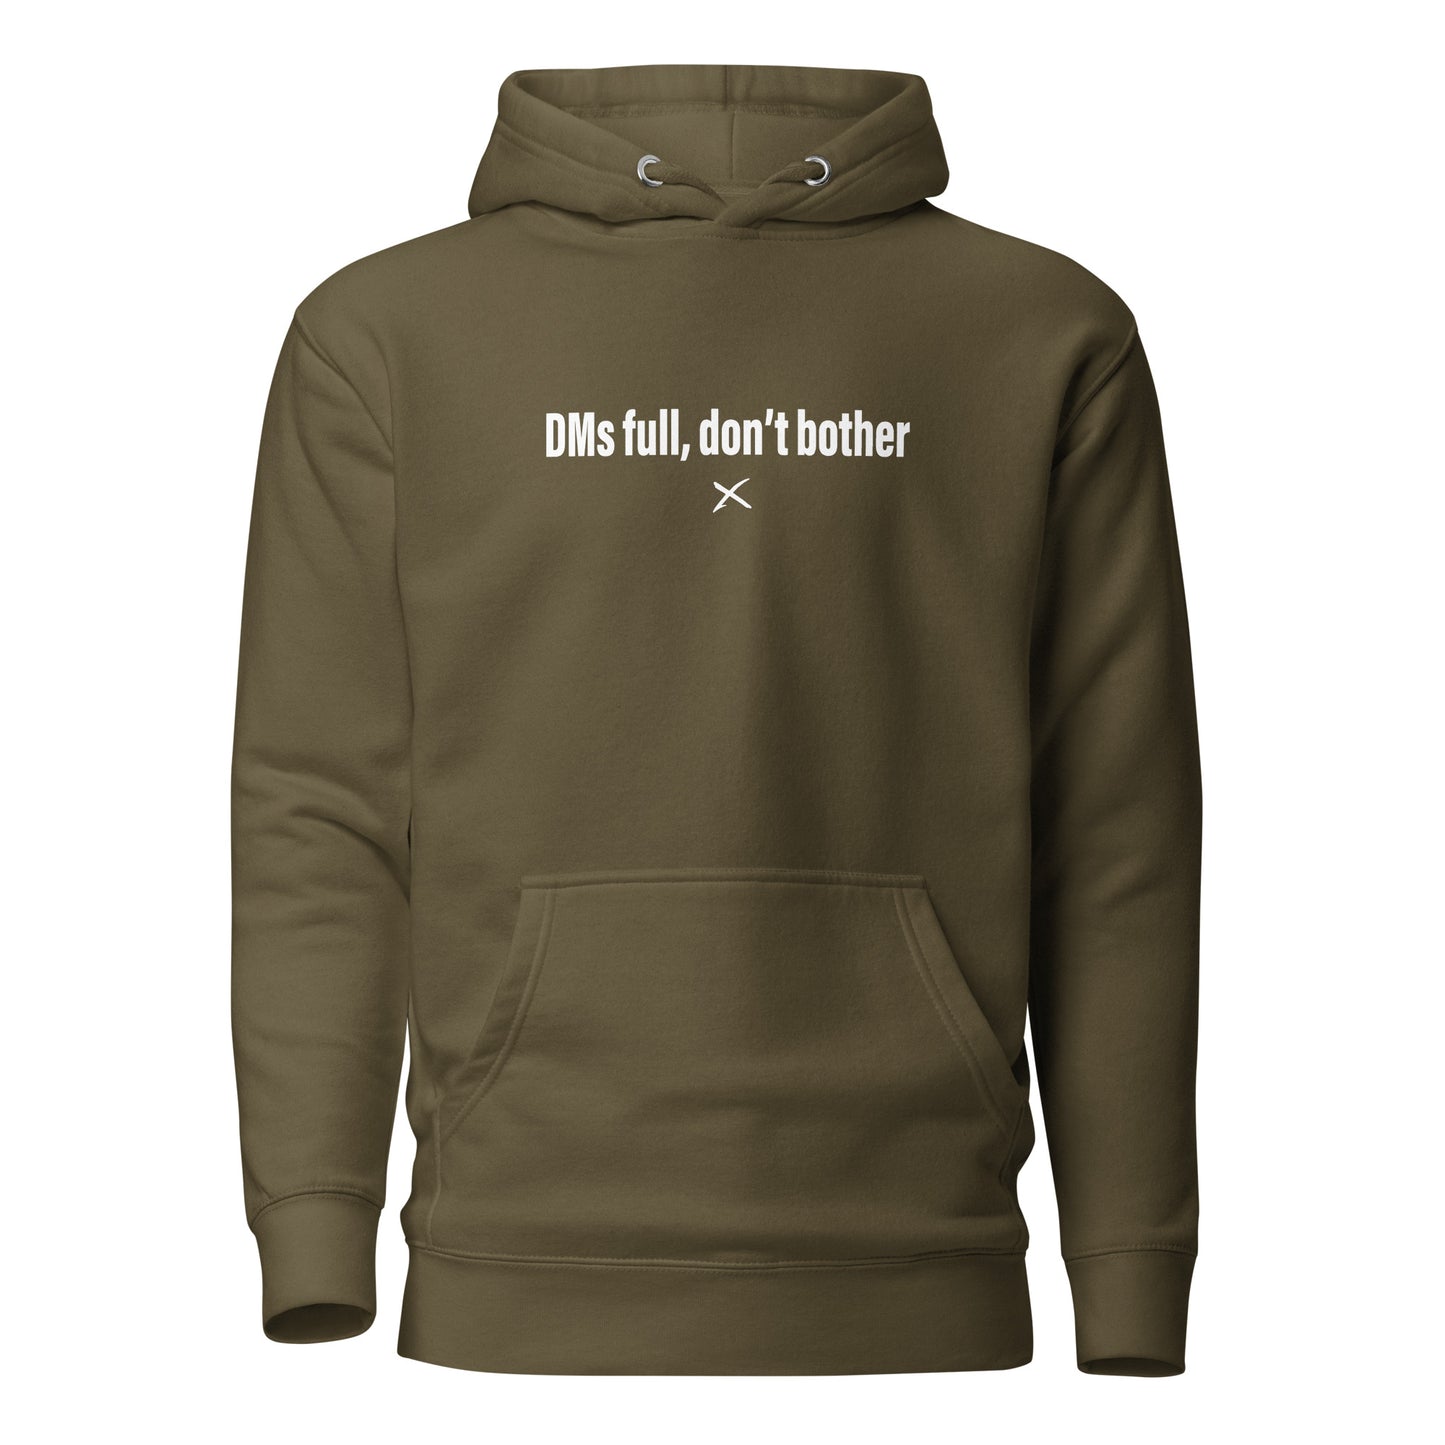 DMs full, don't bother - Hoodie